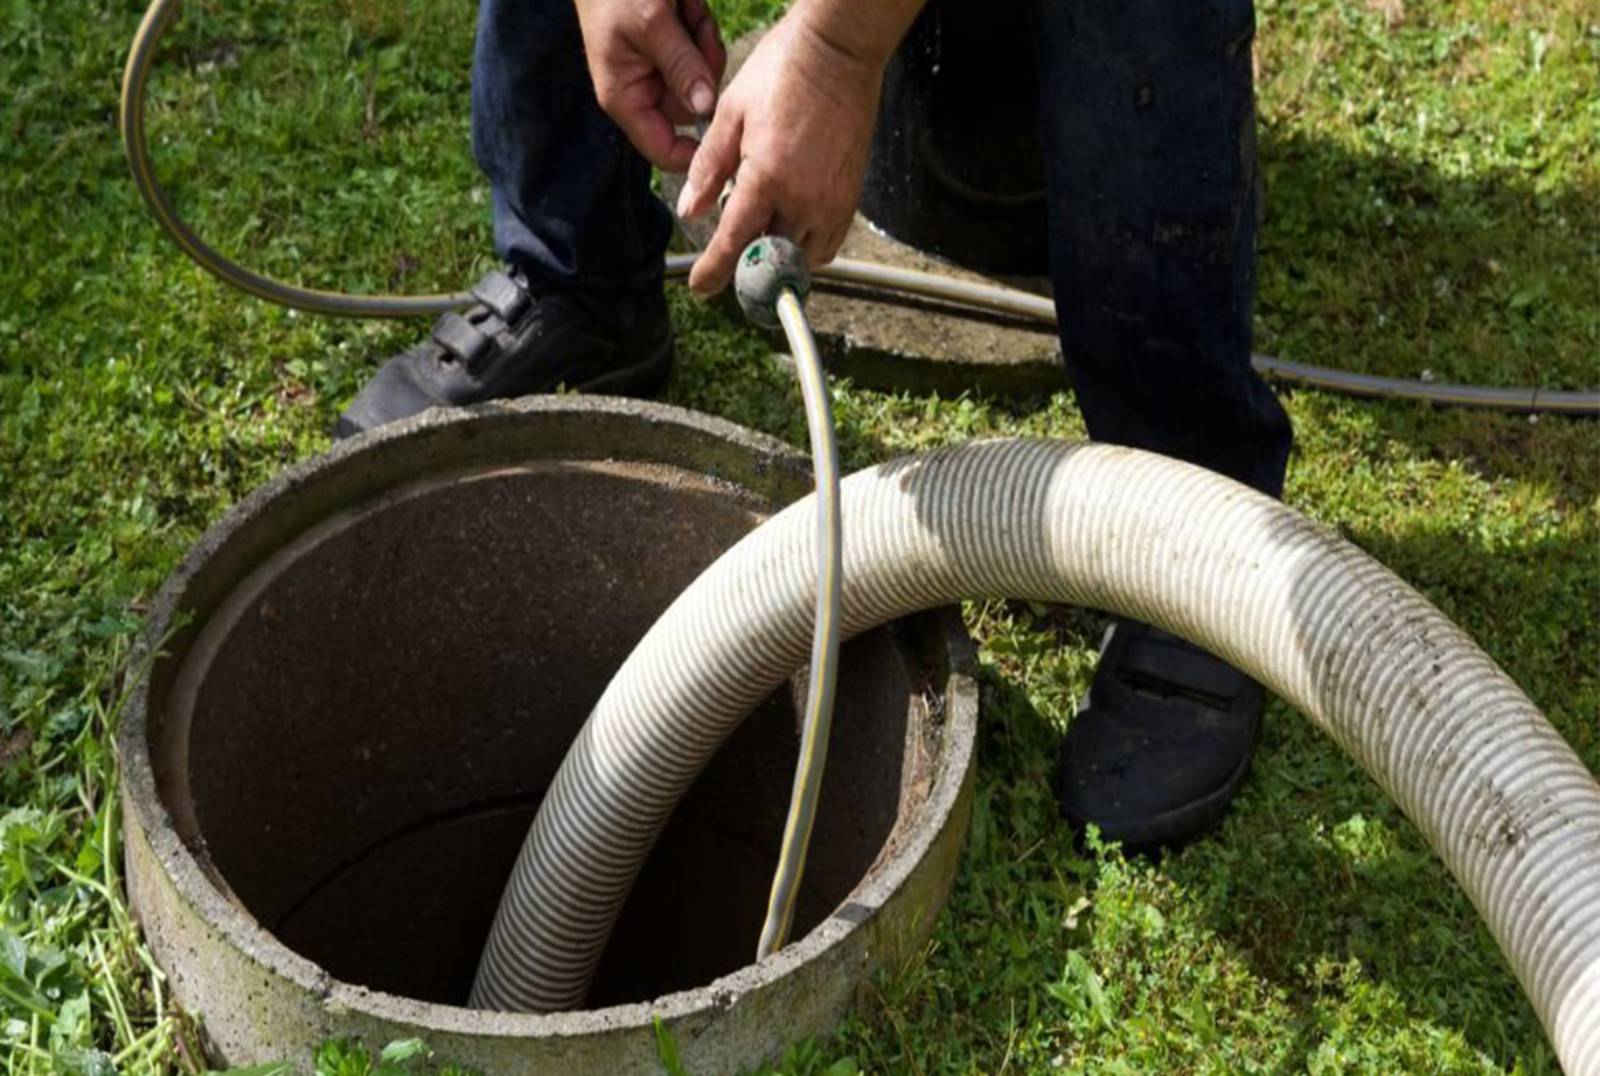 Septic Tank Cleaning vs. Pumping: What’s the Difference?